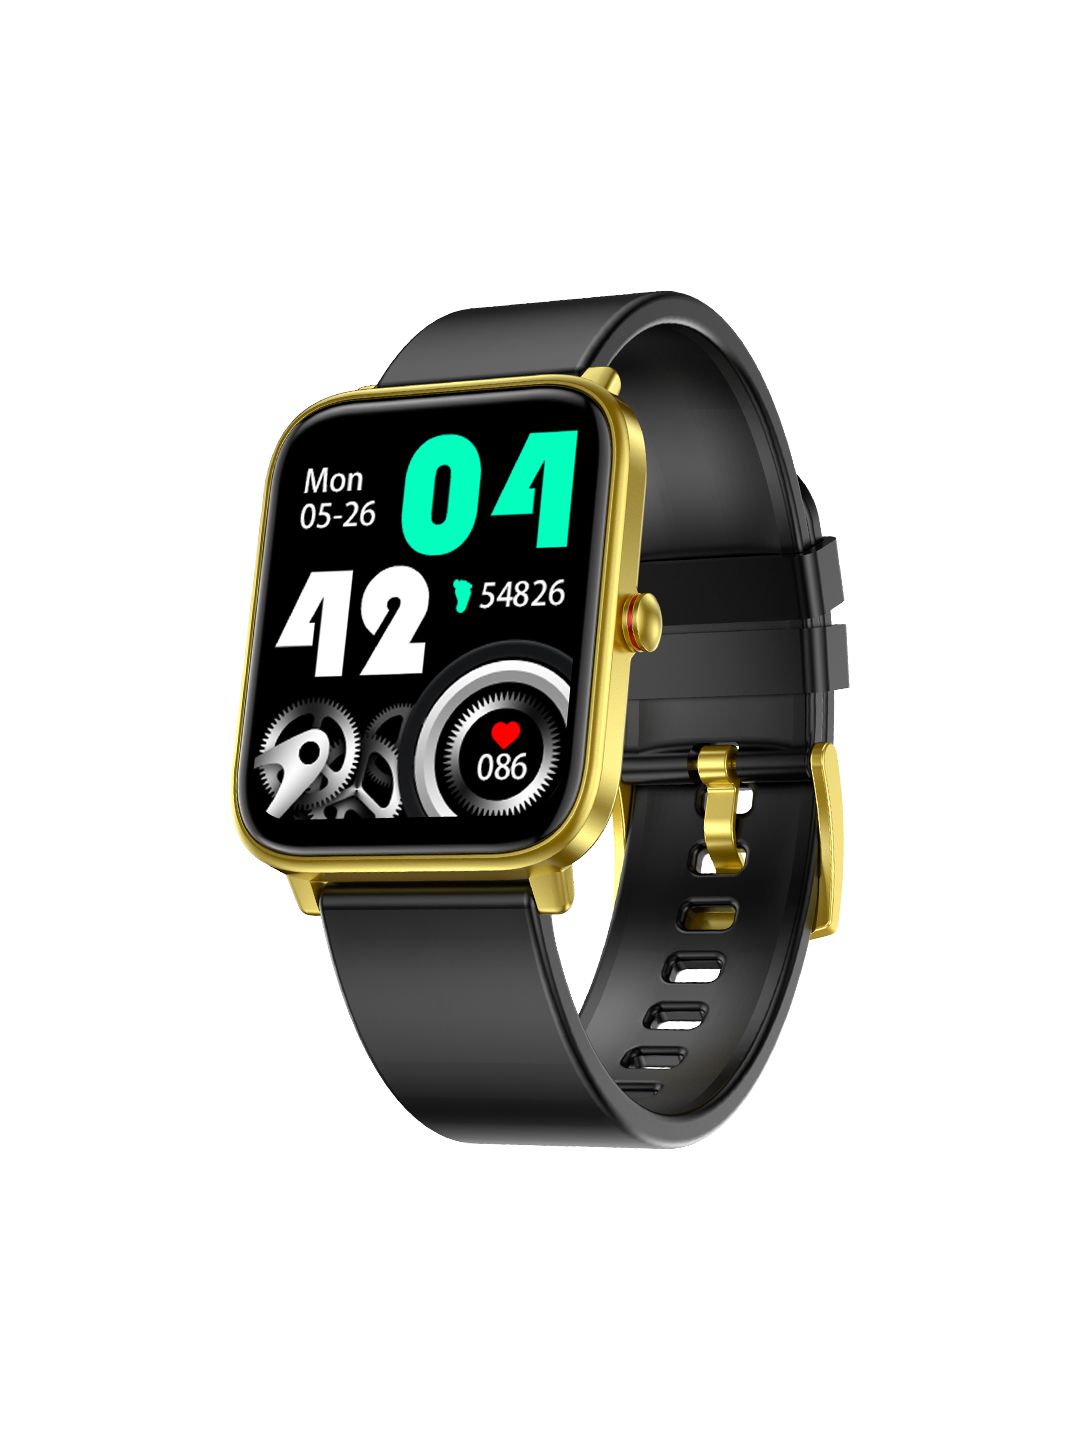 Fire-Boltt Unisex Black Ninja Pro Max Smartwatch 26BSWAAY Price in India